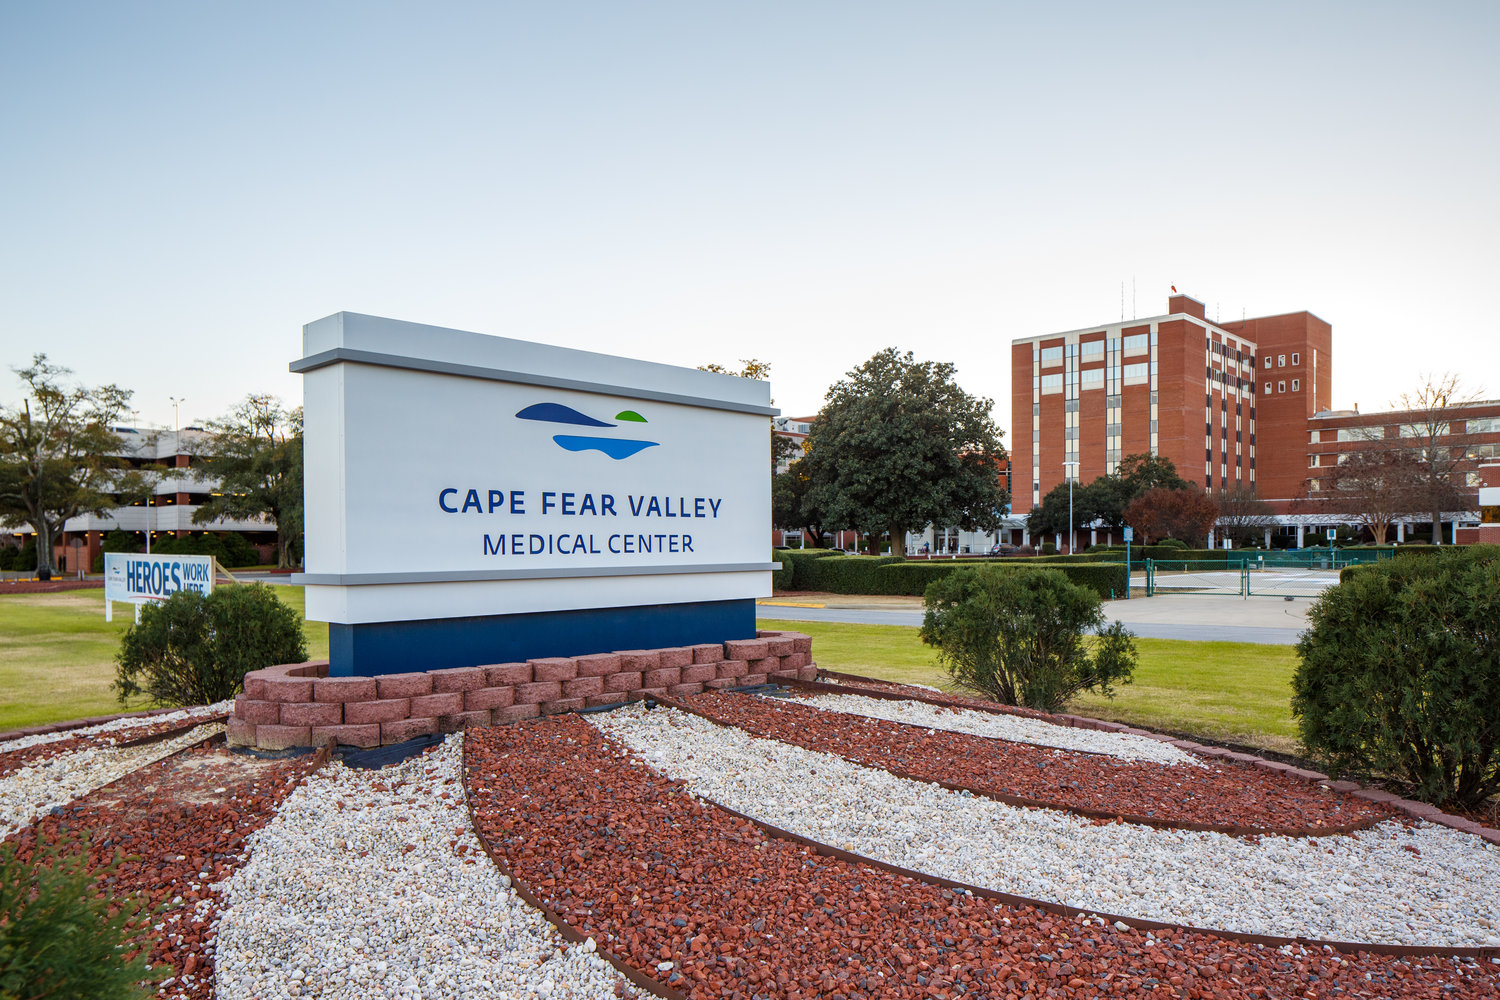 The adult and pediatric emergency departments at Cape Fear Valley Medical Center have experienced higher than normal patient volumes. Doctors cite a rise in flu and RSV as the cause.